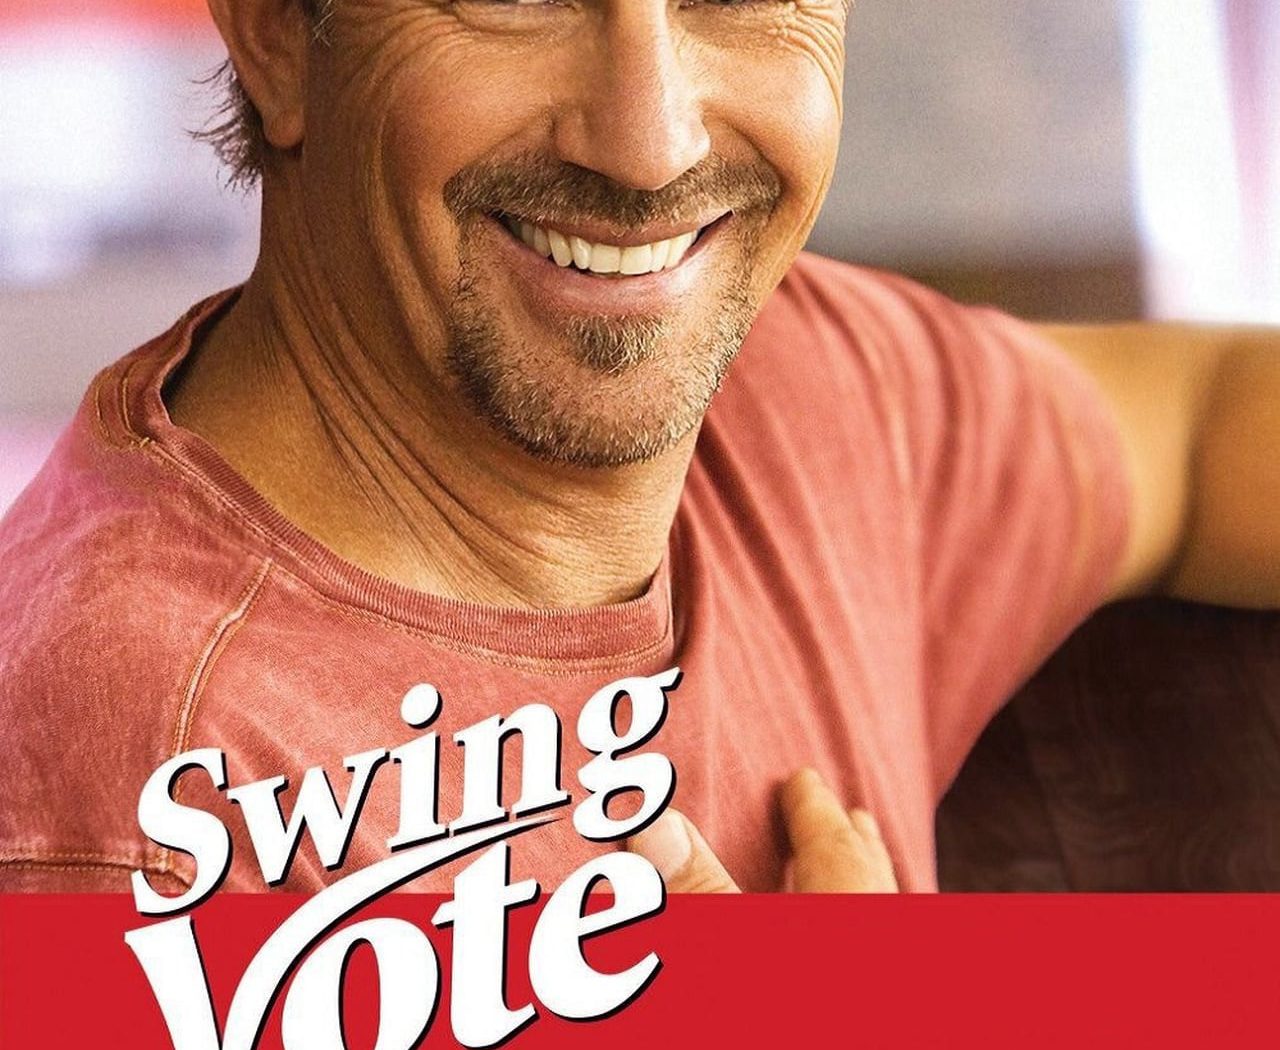 Poster for the movie "Swing Vote"